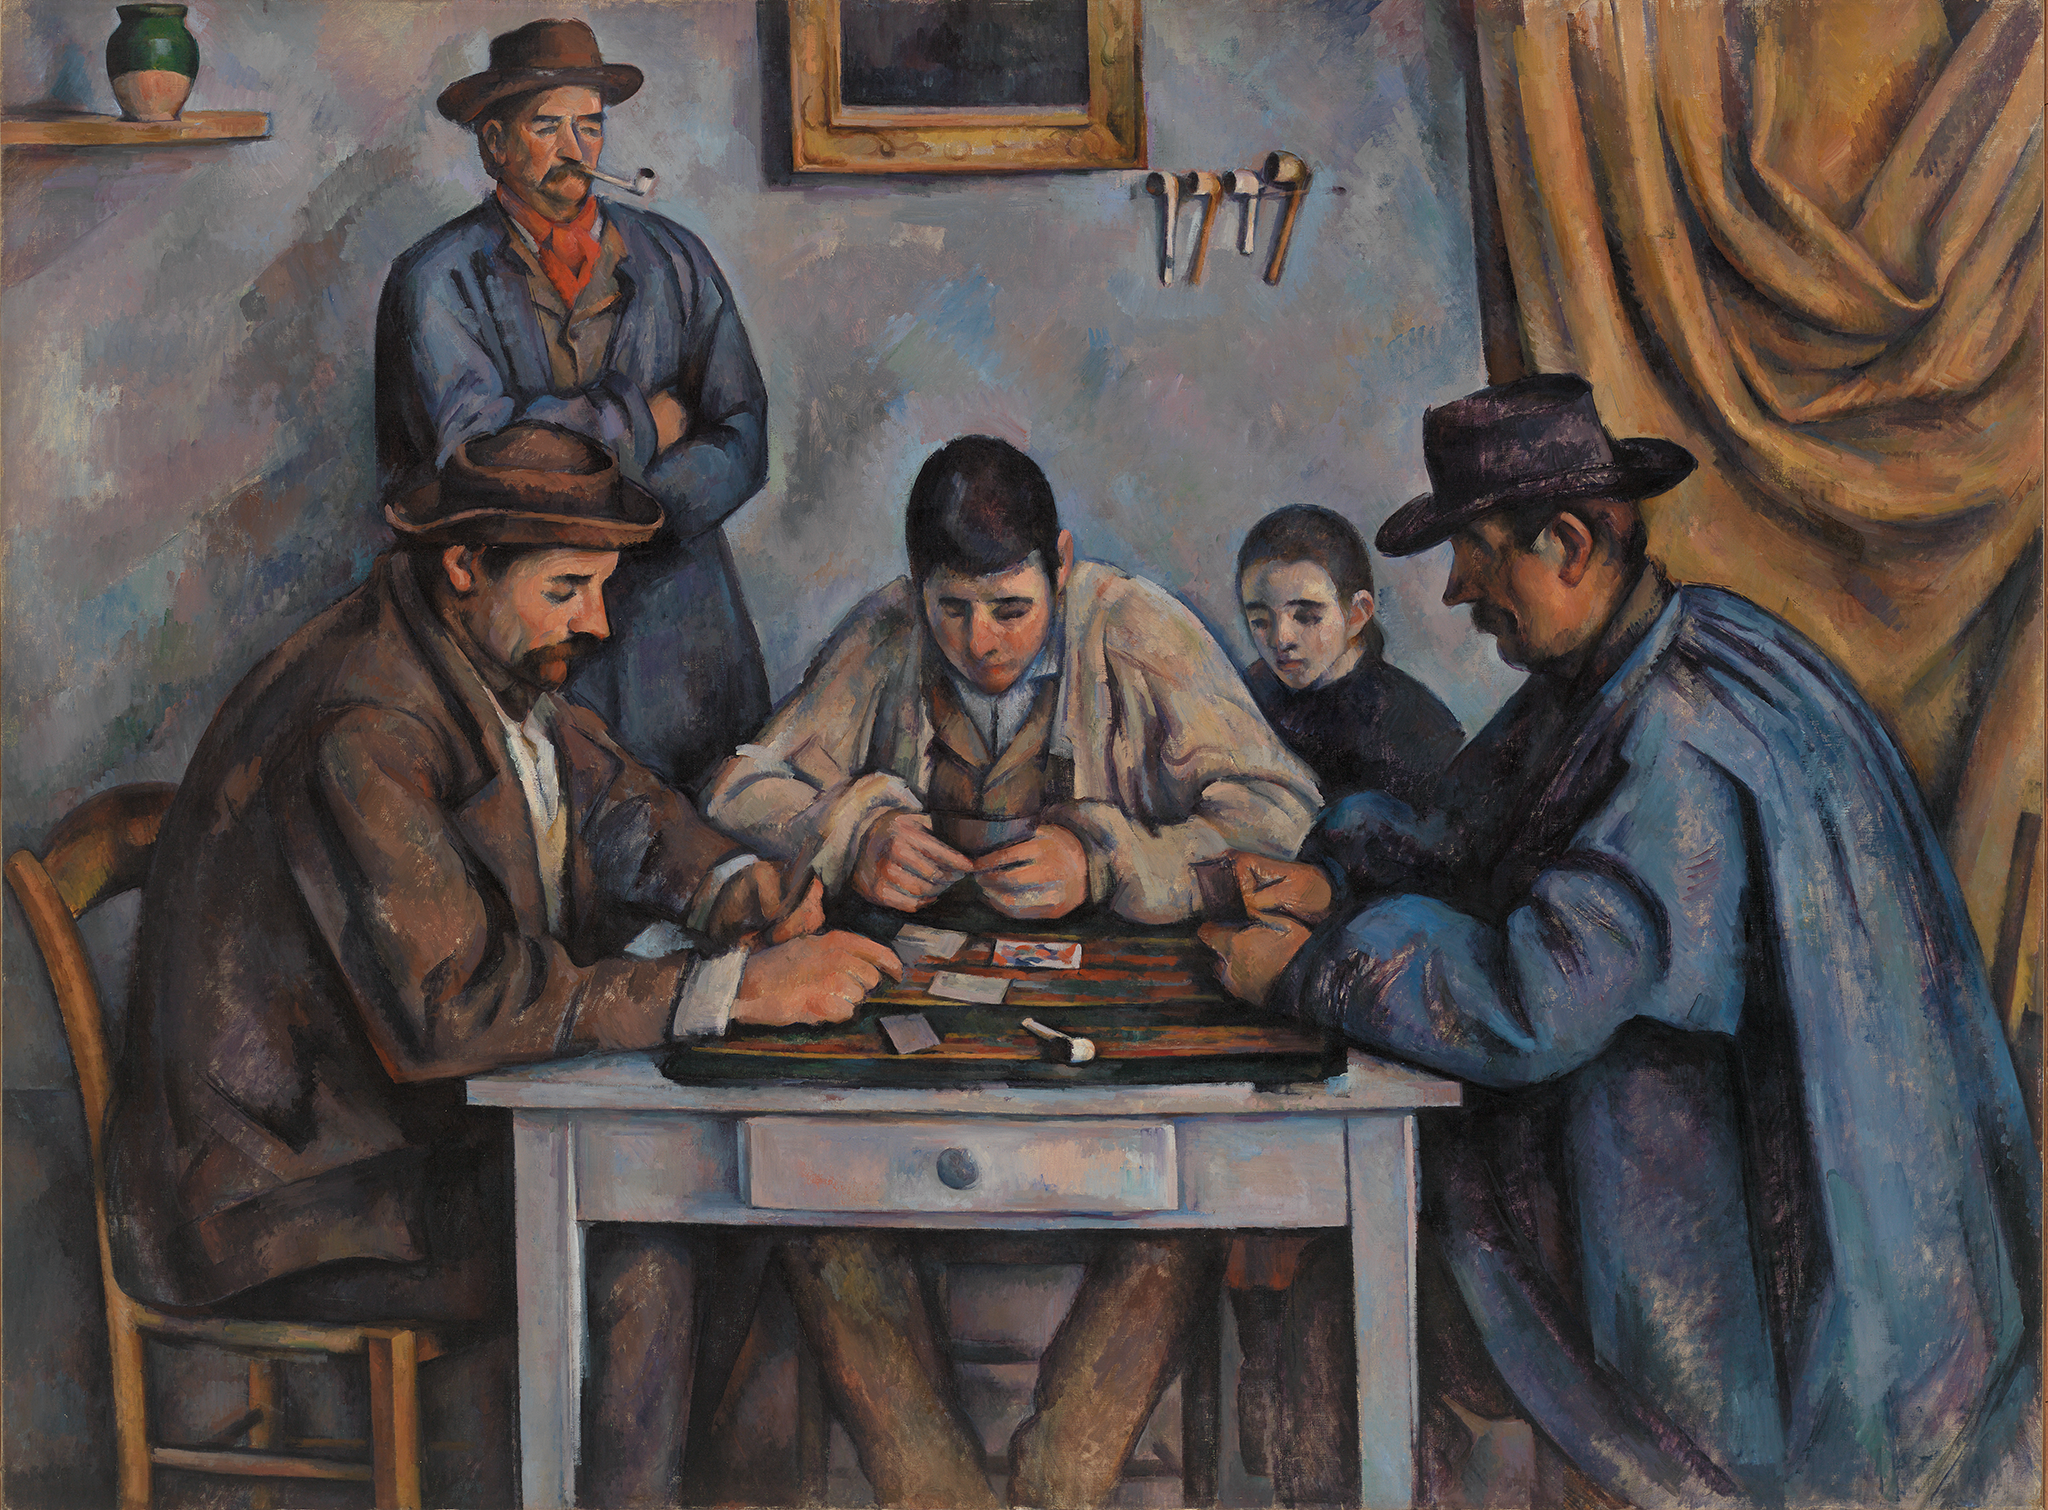 A painting depicting three men sitting down at a small white table playing a game of cards. The men wear brown, white, and blue coats along with brown and black brimmed hats. They focus on the cards in their hand and on the table. Behind the man in the middle seems to be a boy wearing a black clothing. In the background, there is a man against the light blue and green wall smoking a pipe. To his right is the bottom of a framed painting, a stand holding four other pipes, and a large golden cloth hanging.